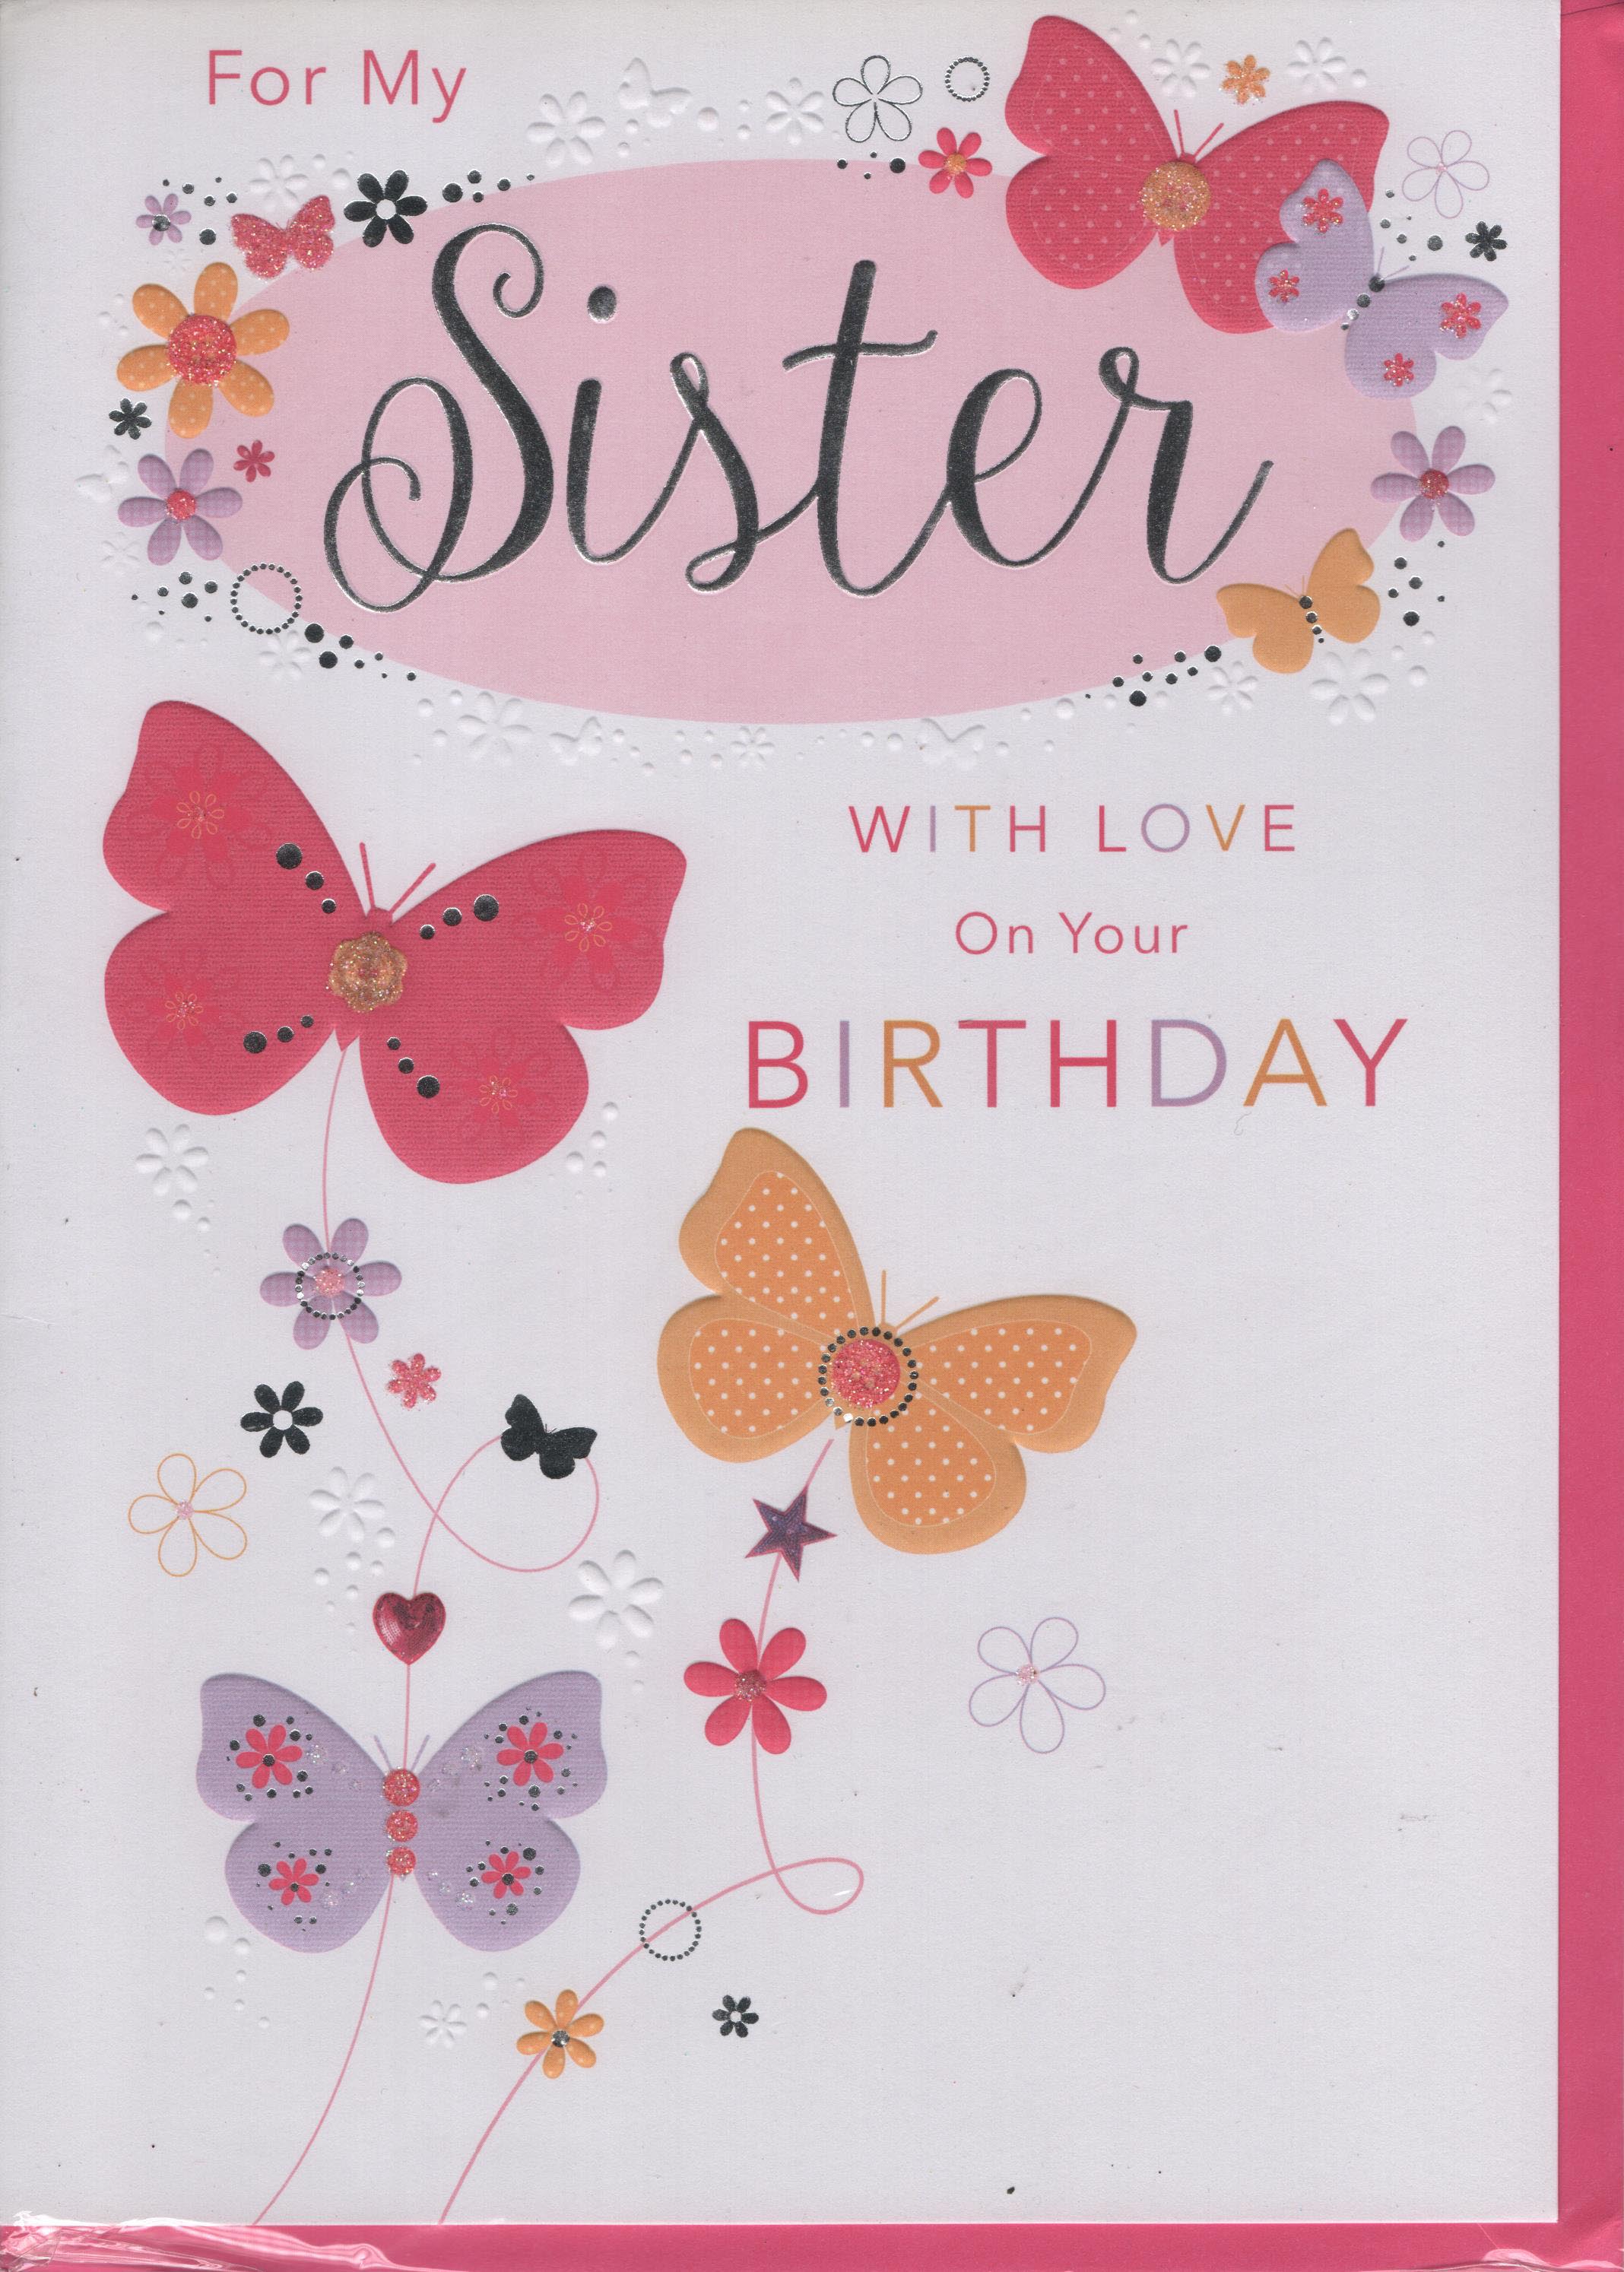 For My Sister With Love on Your Birthday Greeting Card